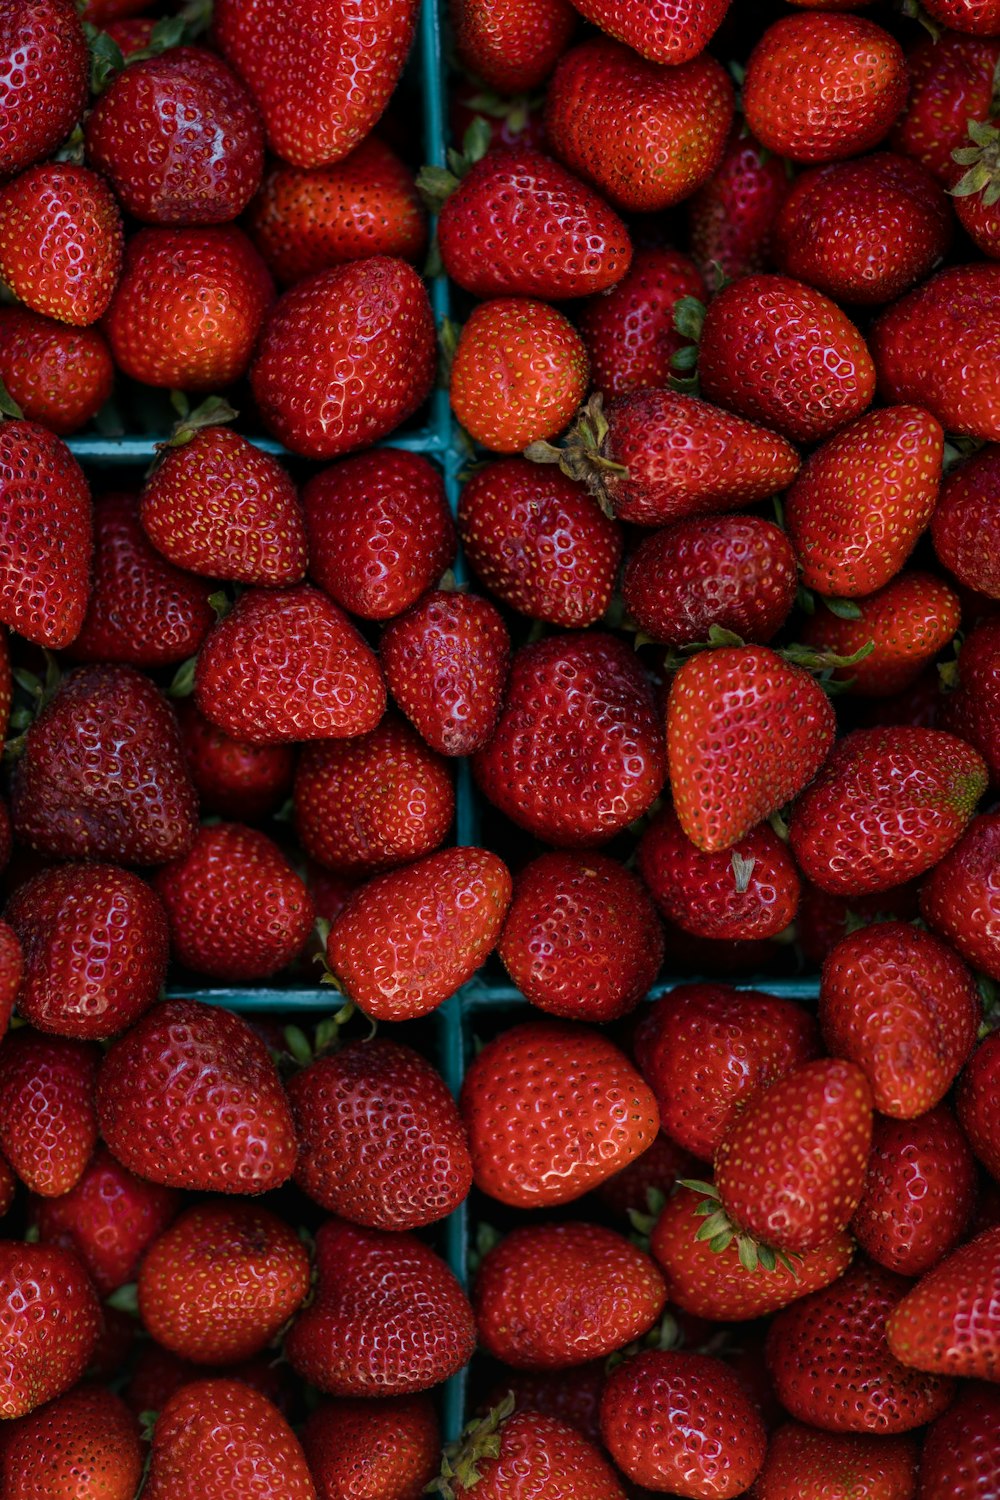 a pile of strawberries